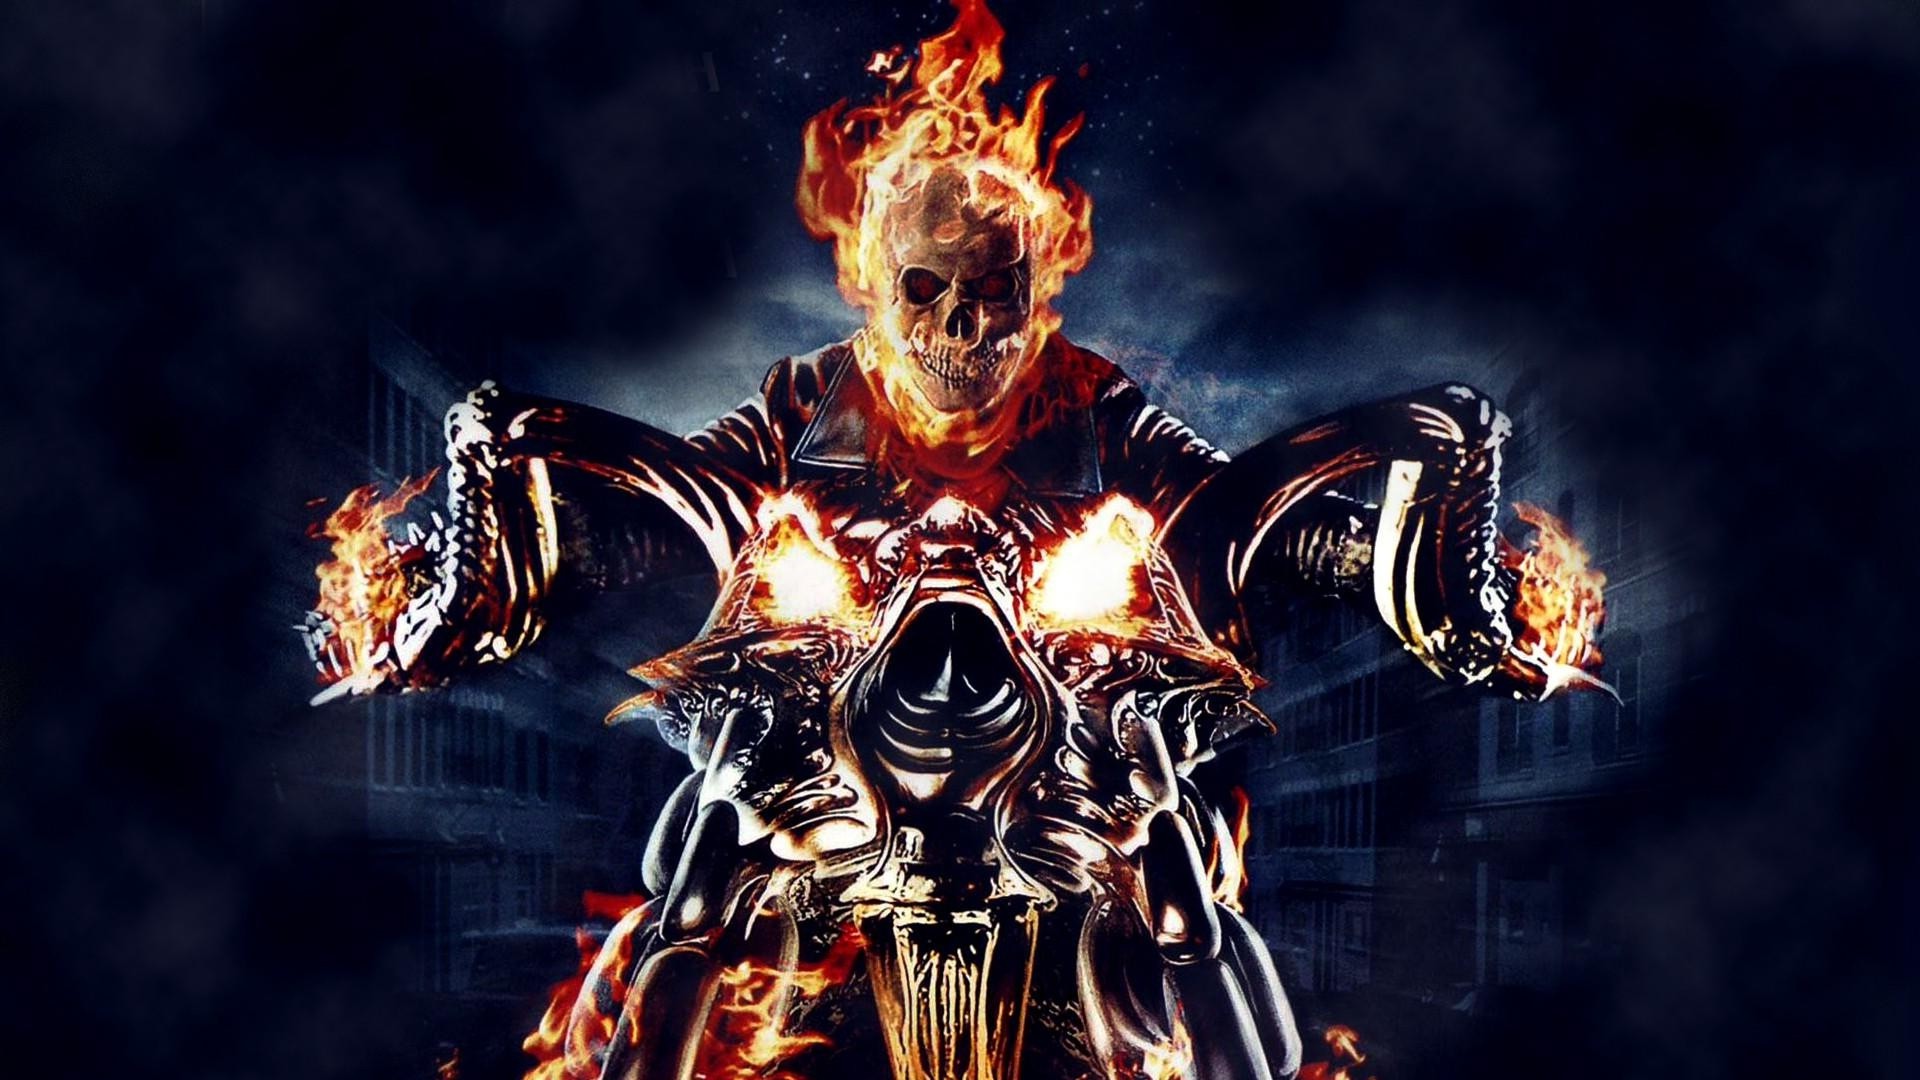 Ghost Rider, Skull, Fire, Motorcycle, Comics, Graphic Novels Wallpaper